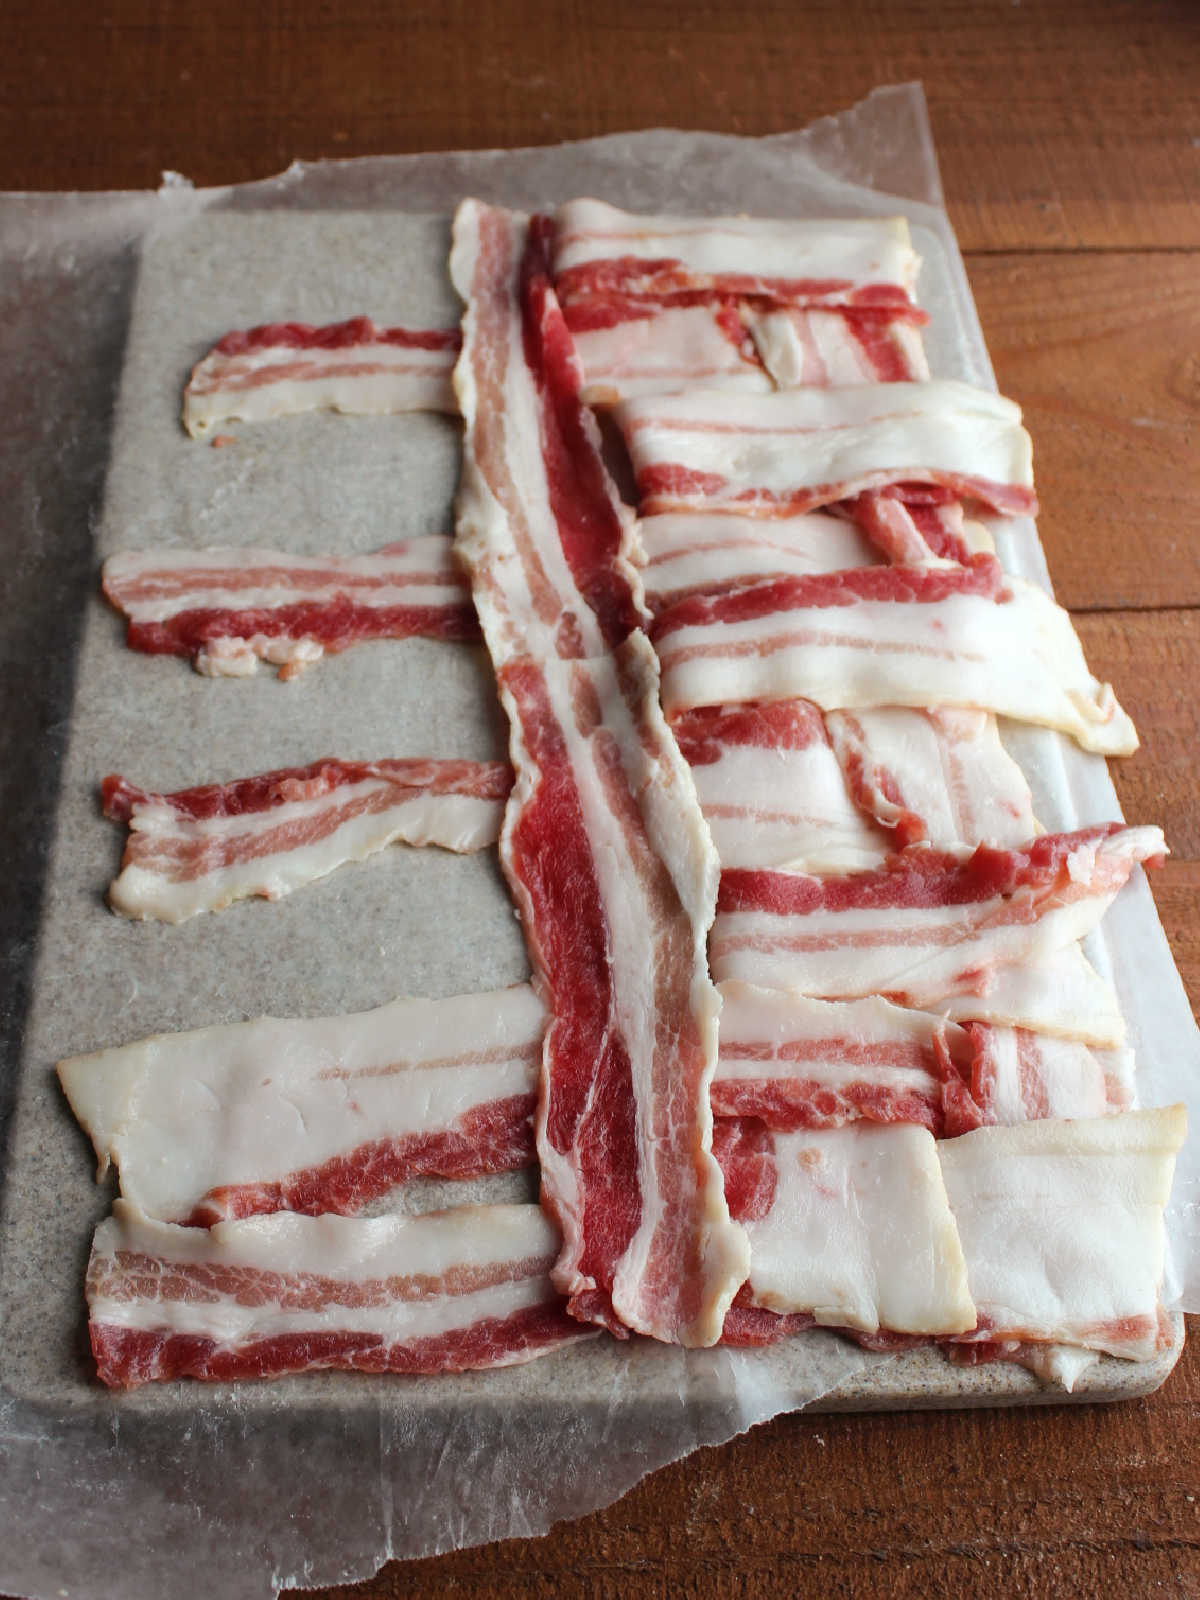 Weaving bacon slices with every other crosswise piece of bacon being folded back so a piece of bacon can be inserted going the other way.